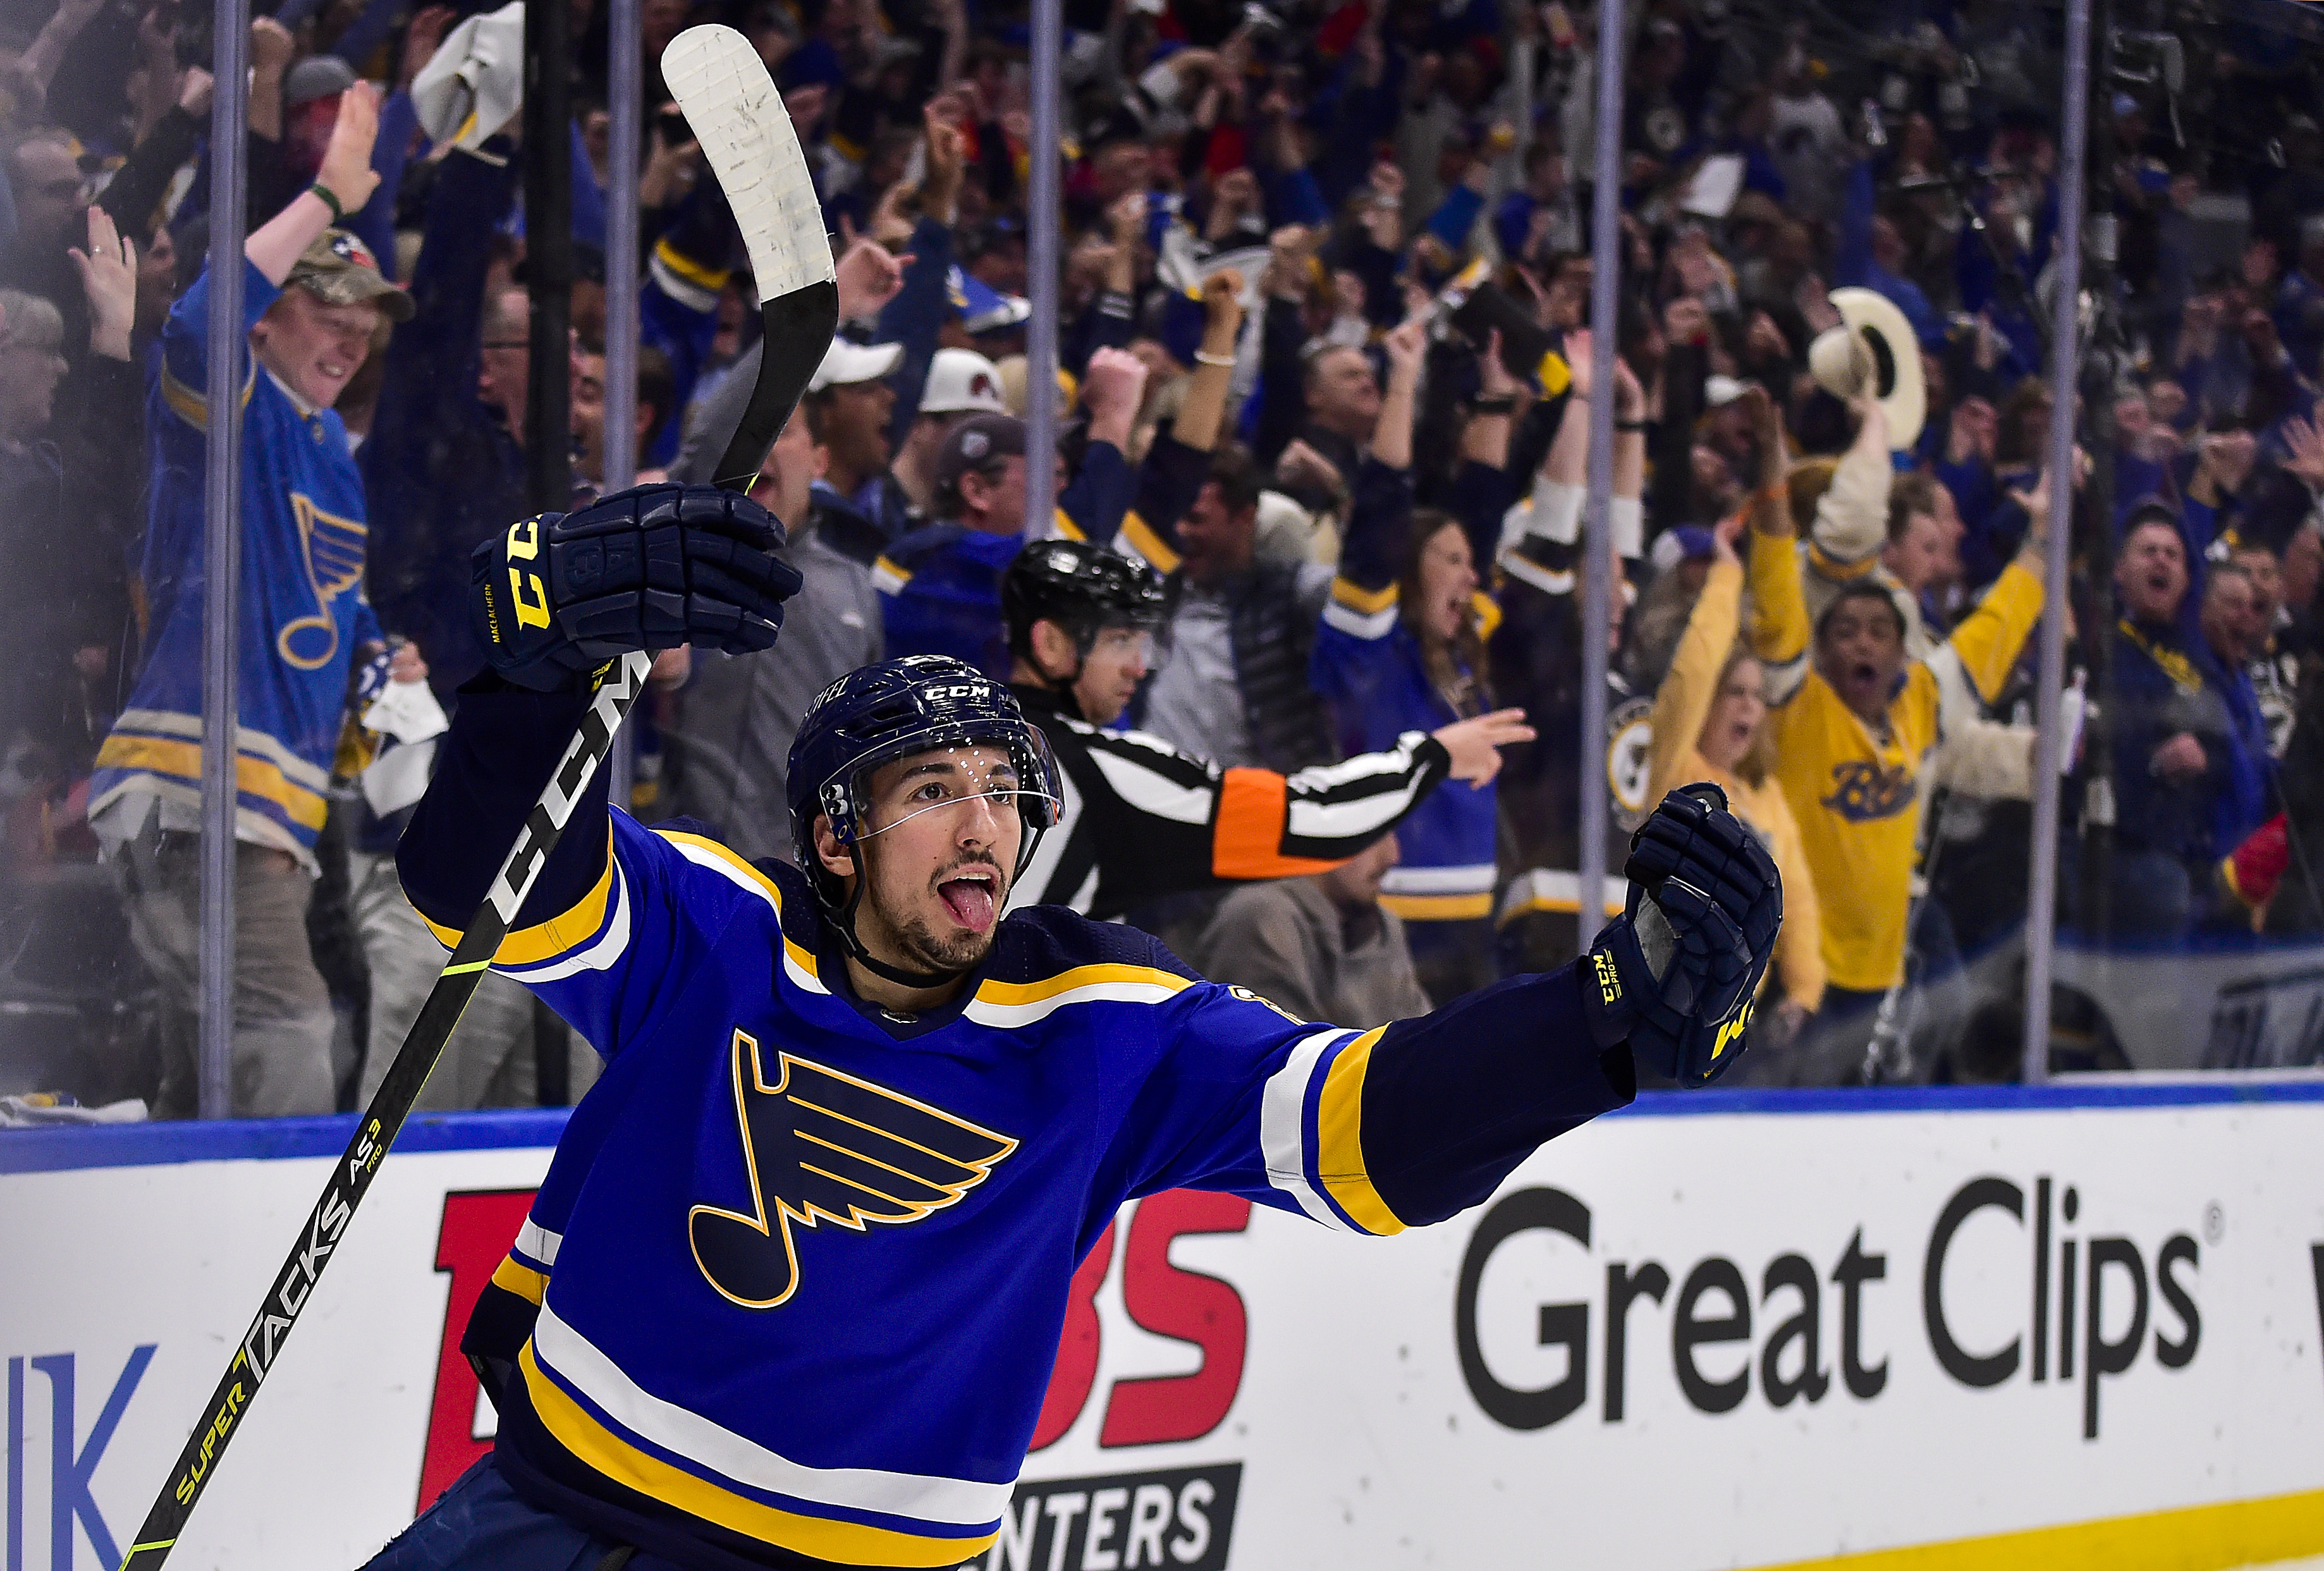 How Much Does It Cost to Attend a St. Louis Blues Game?